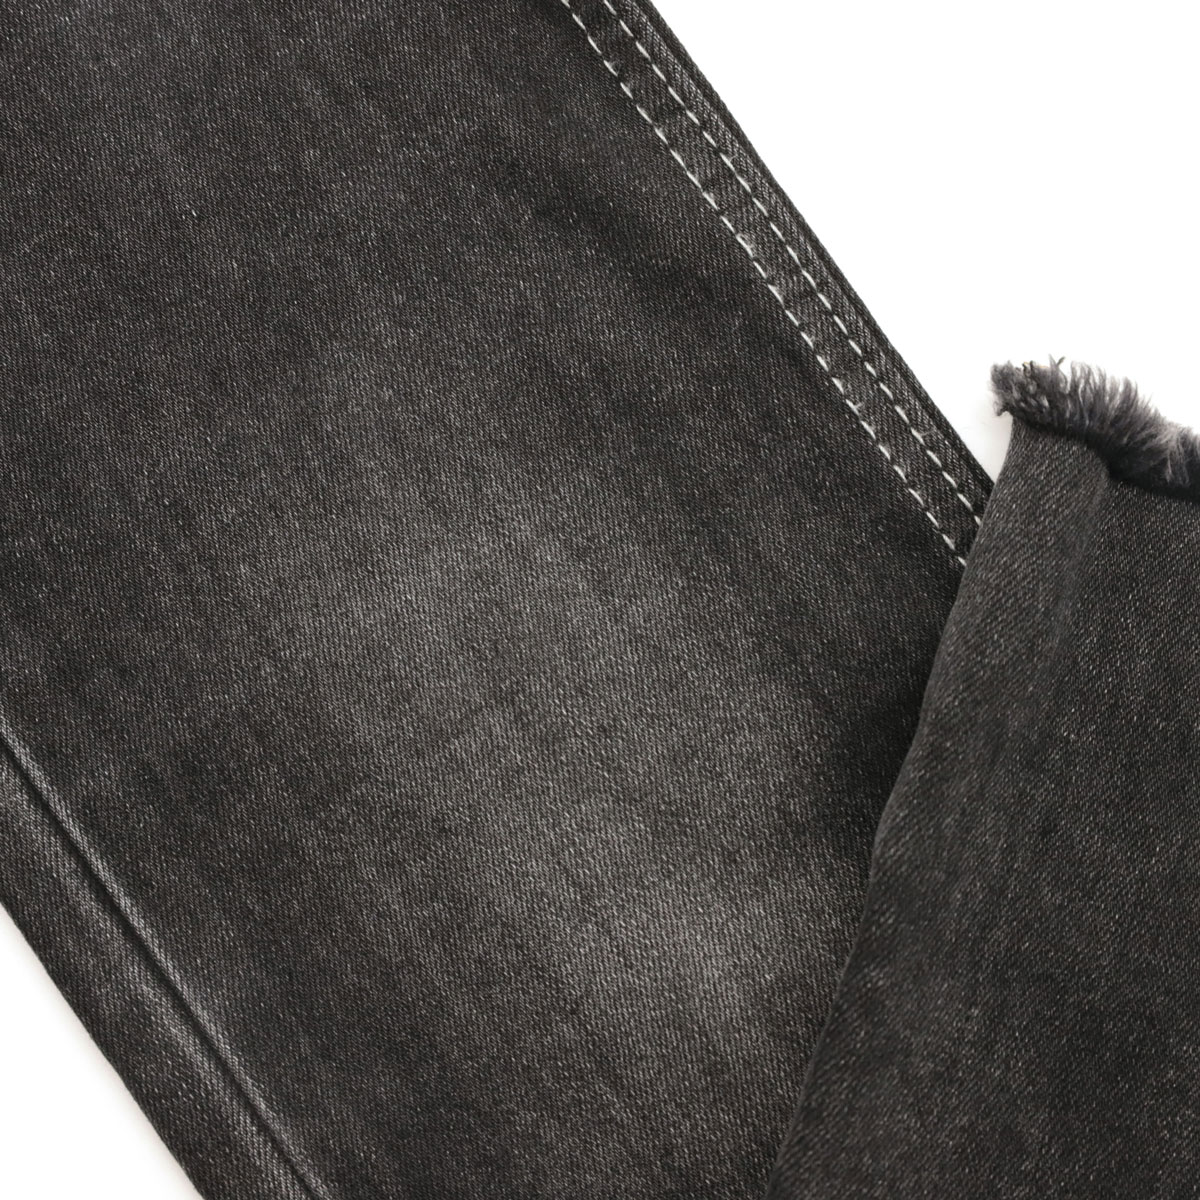 A Simple Way to Have the Best Super Stretch Denim Fabric Options 2